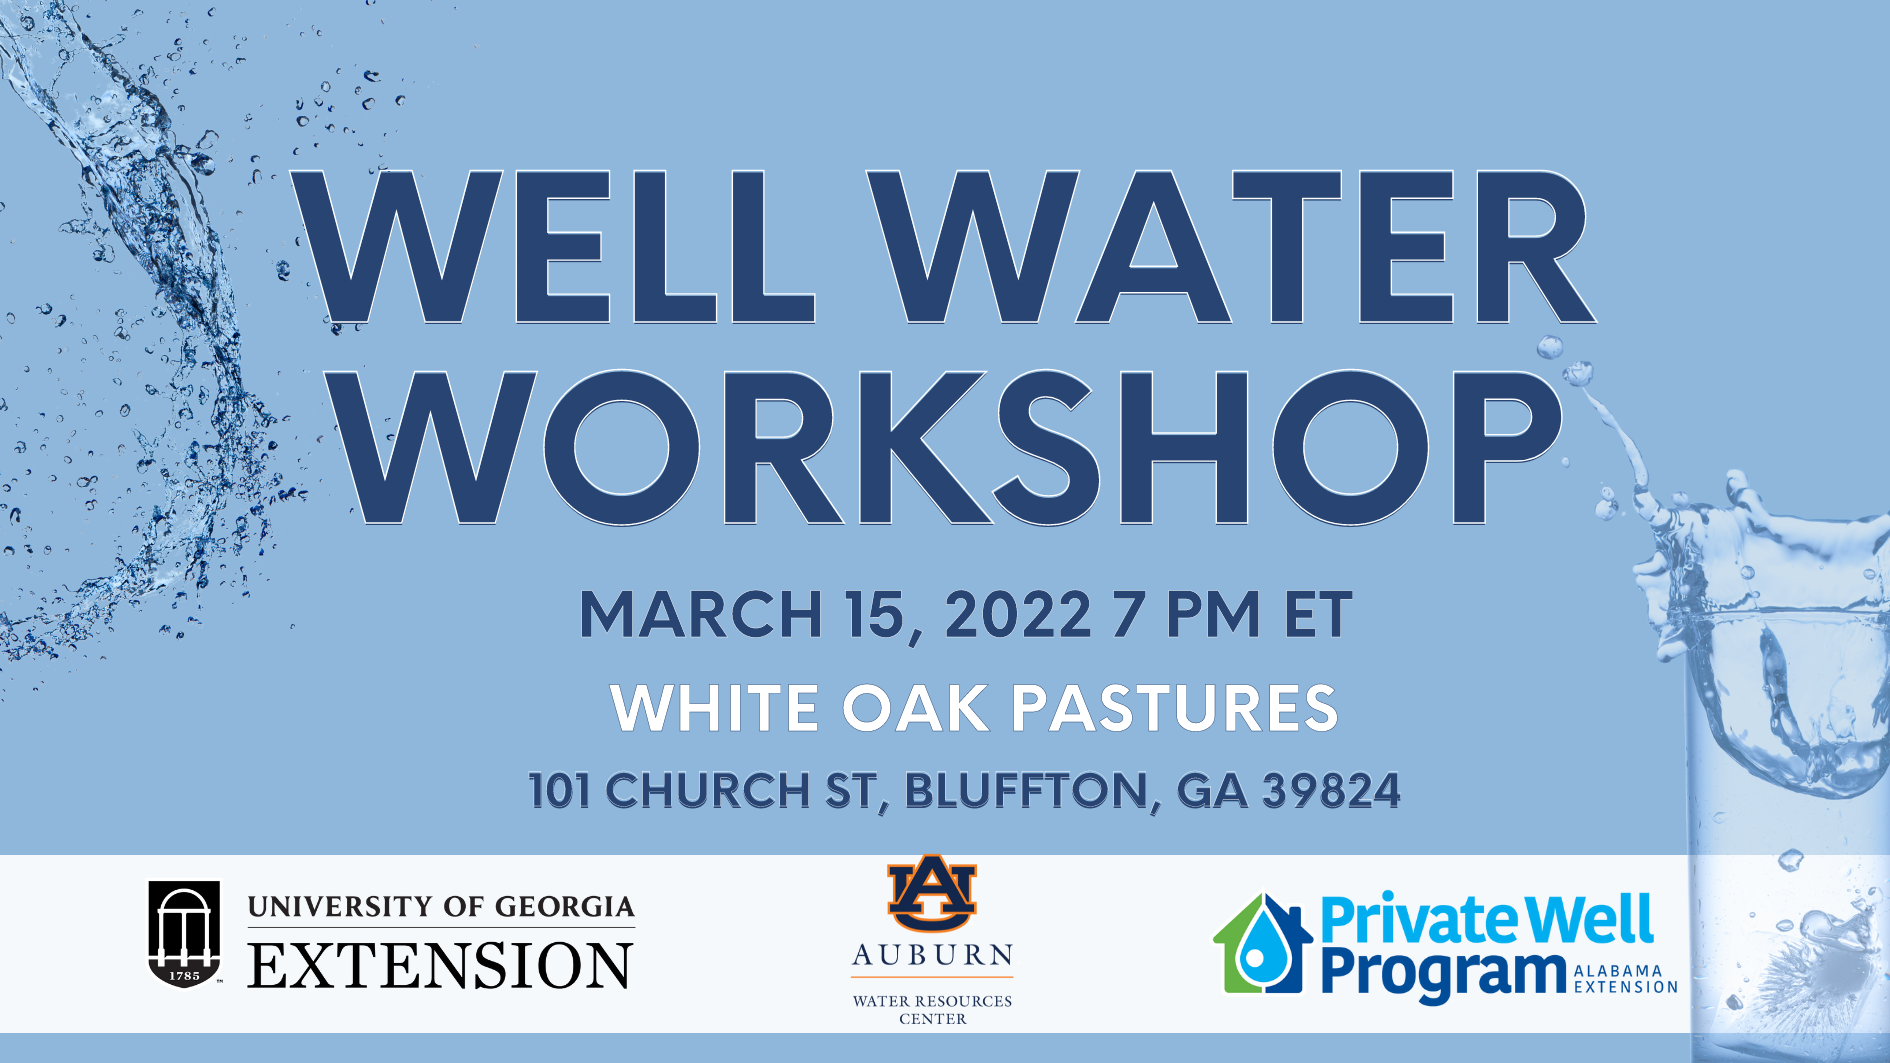 Well Water Workshop on March 15, 2022 at White Oak Pastures